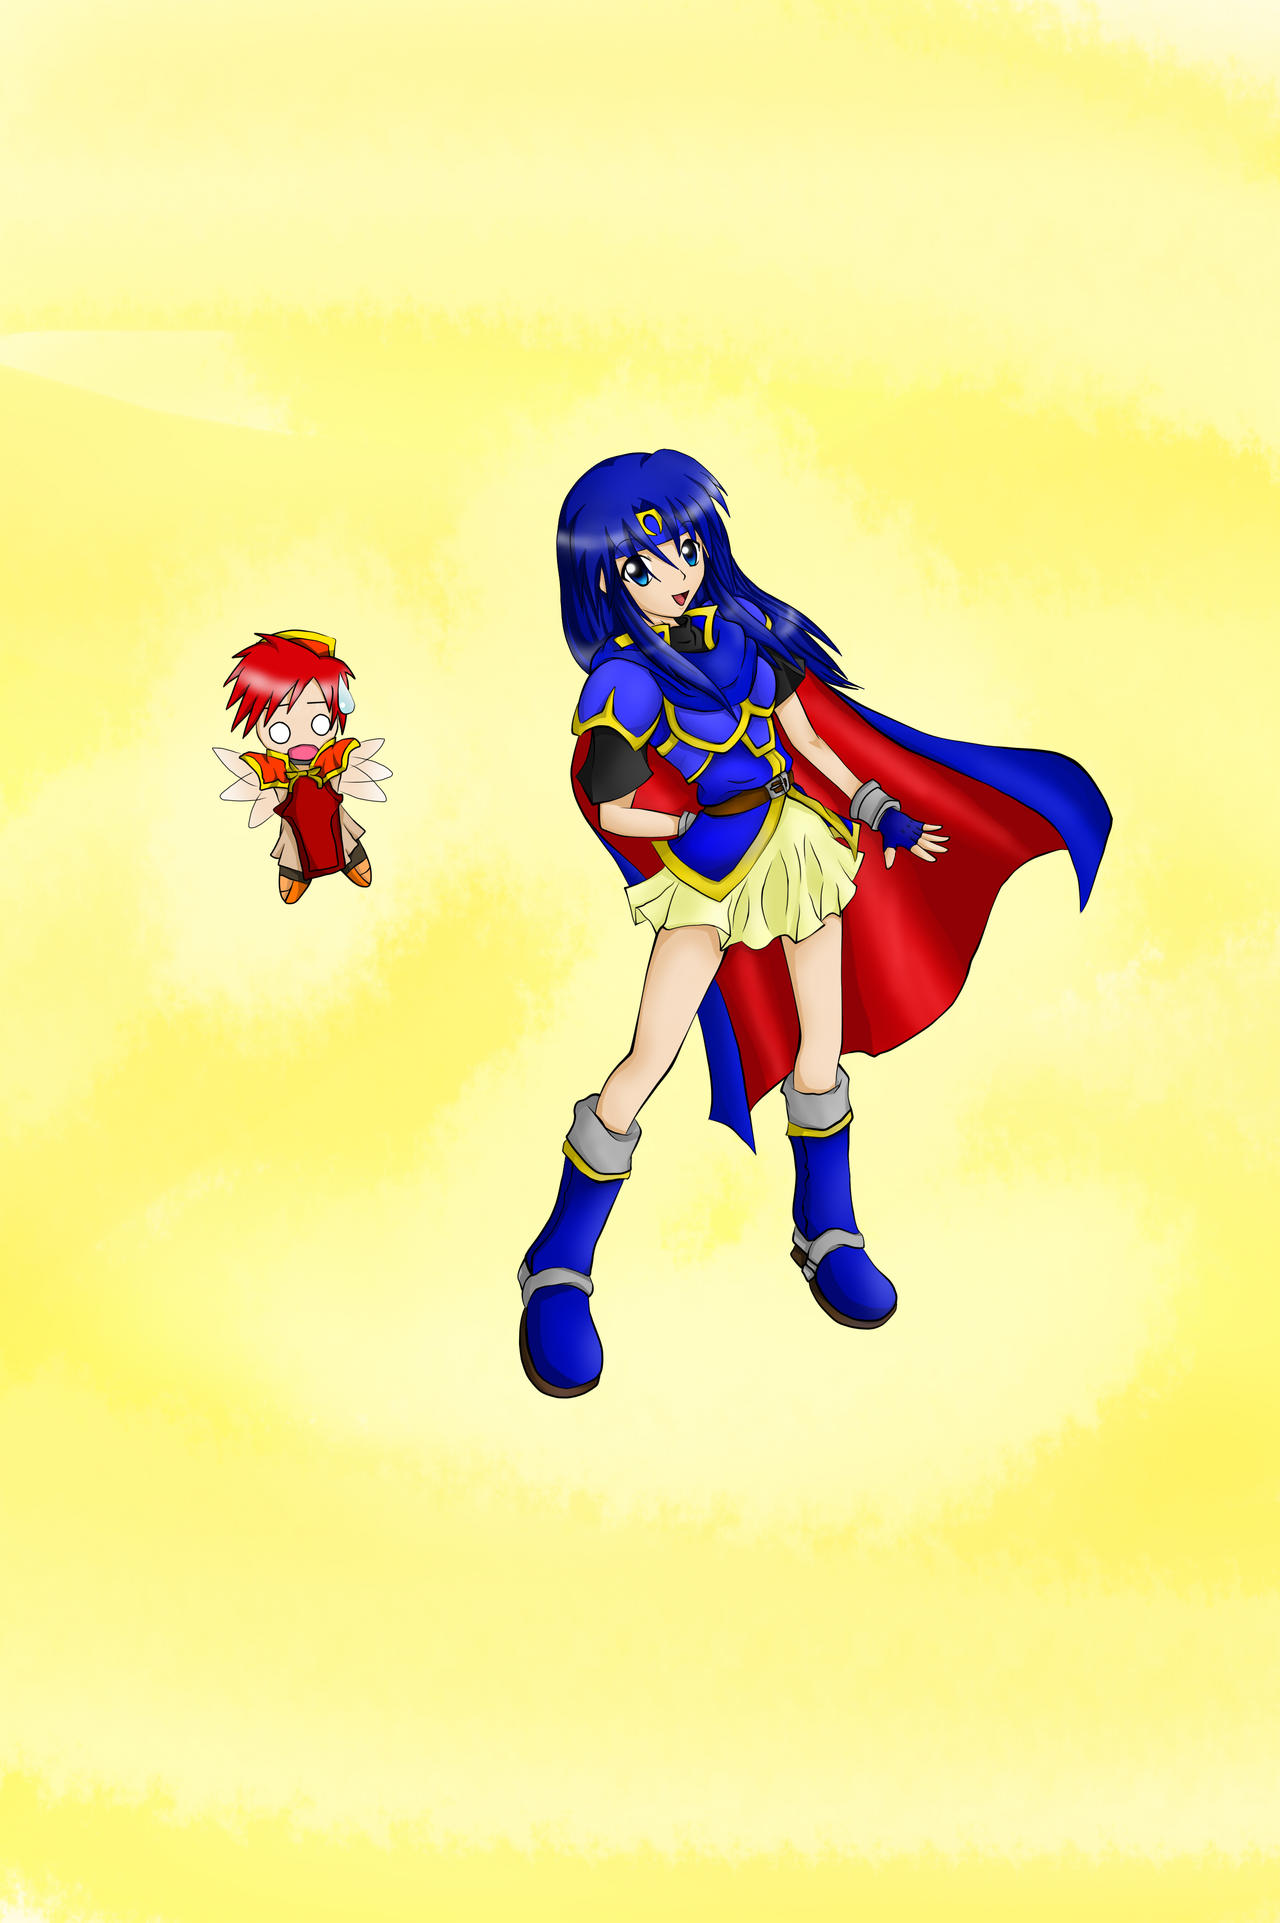 Lilina and Roy Class Swap